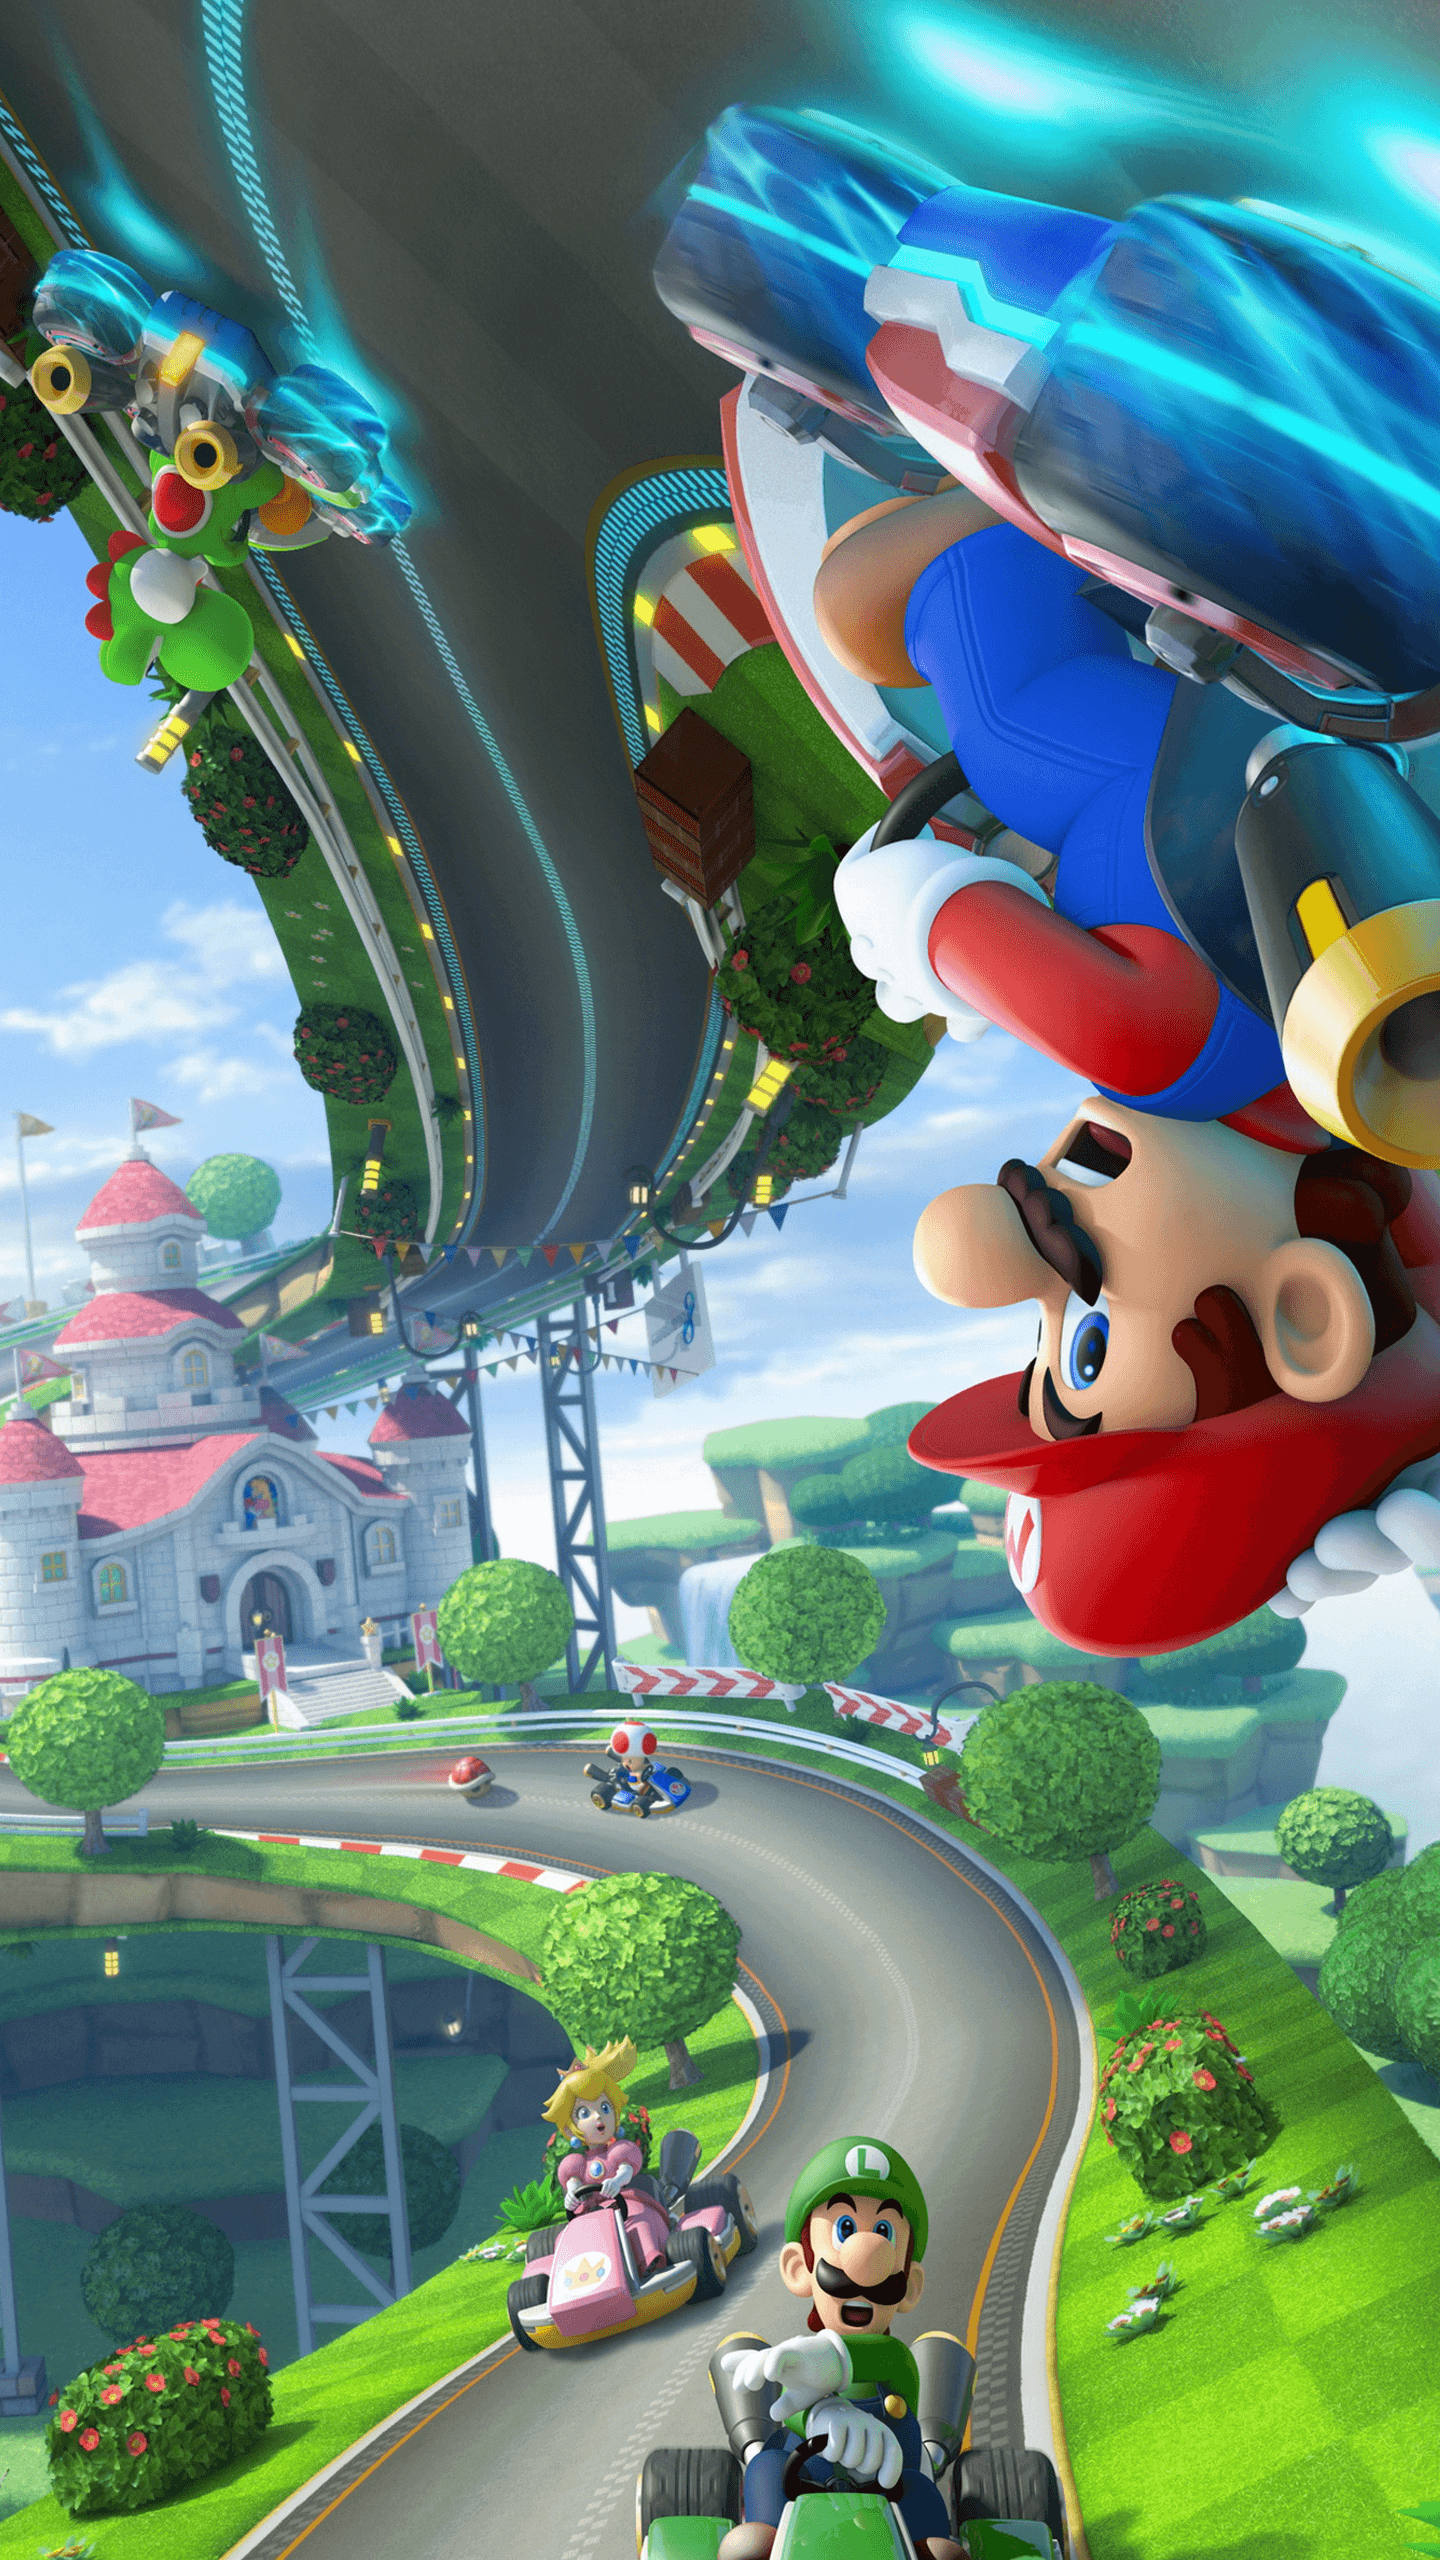 This is a neat wallpaper. #xboxgames. Mario kart, Super